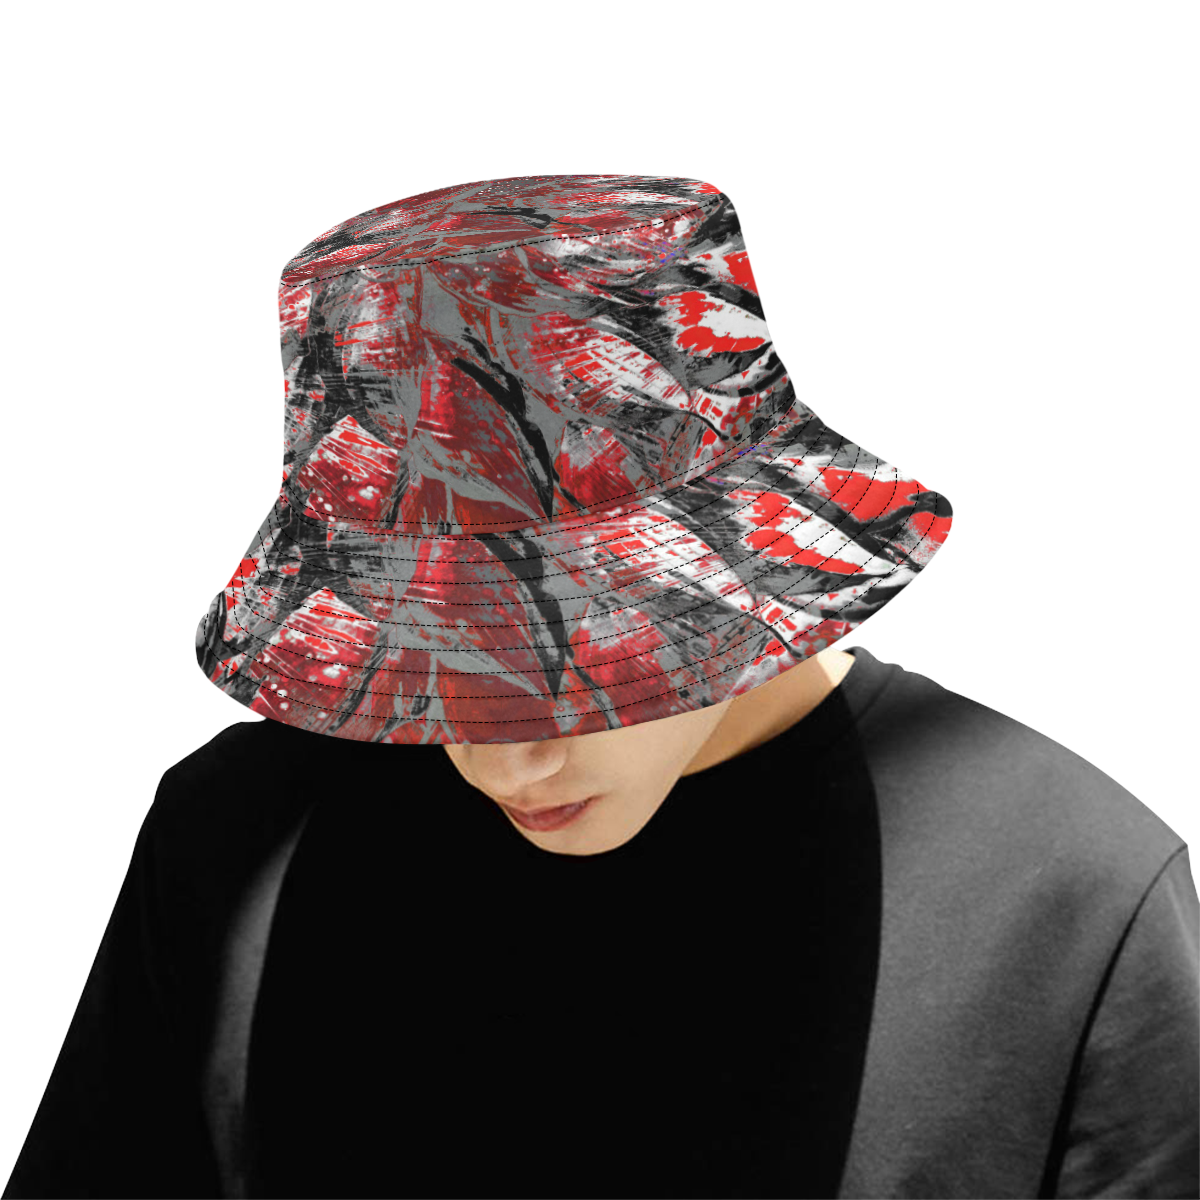 wheelVibe2_8500 4 low All Over Print Bucket Hat for Men